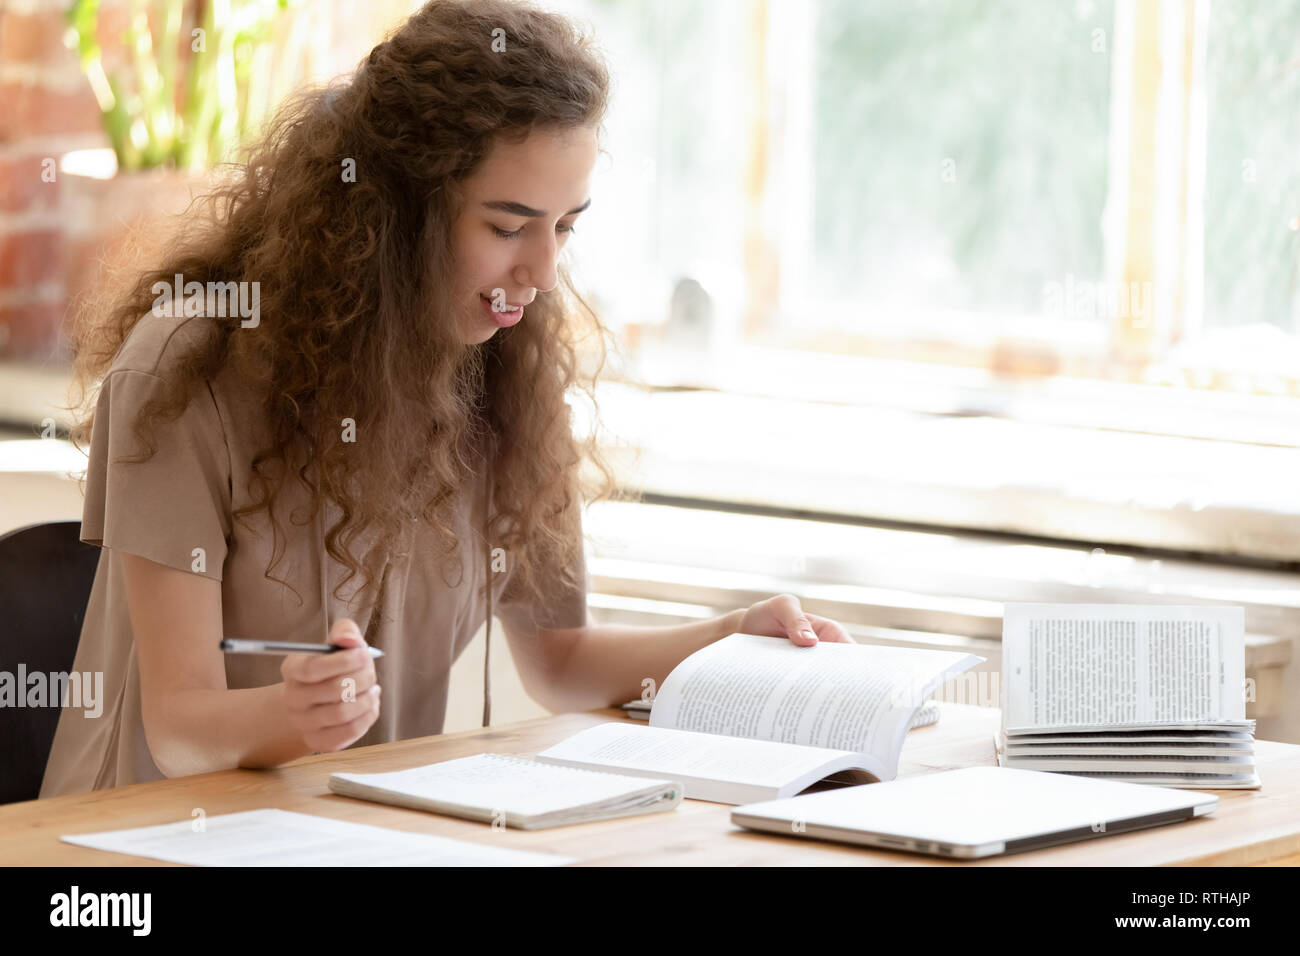 Teen girl college student studying reading textbooks learning making notes Stock Photo